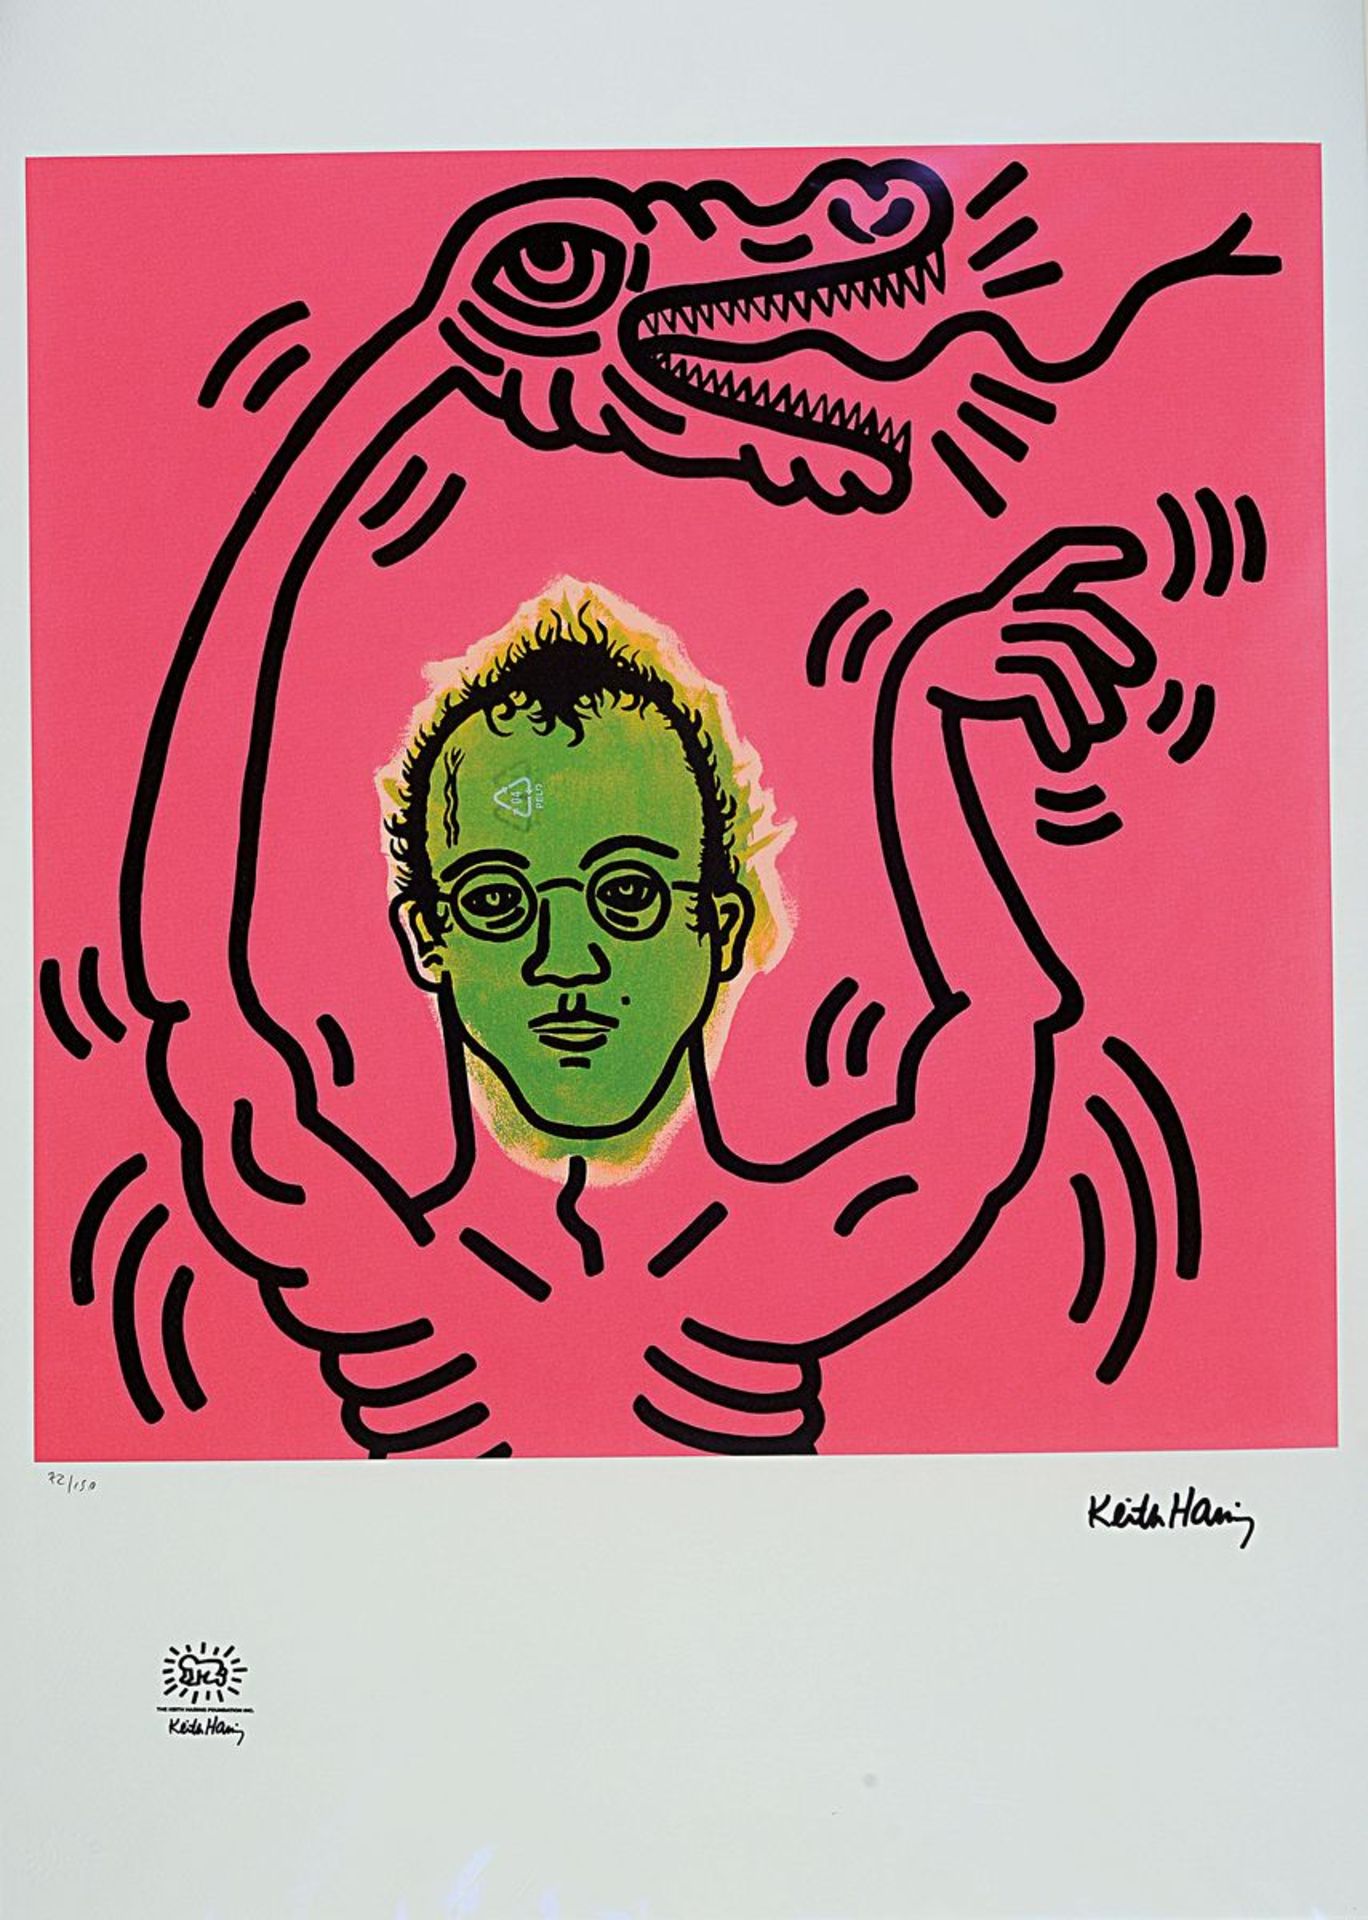 Nach Keith Haring (1958-1990), Lithographie,